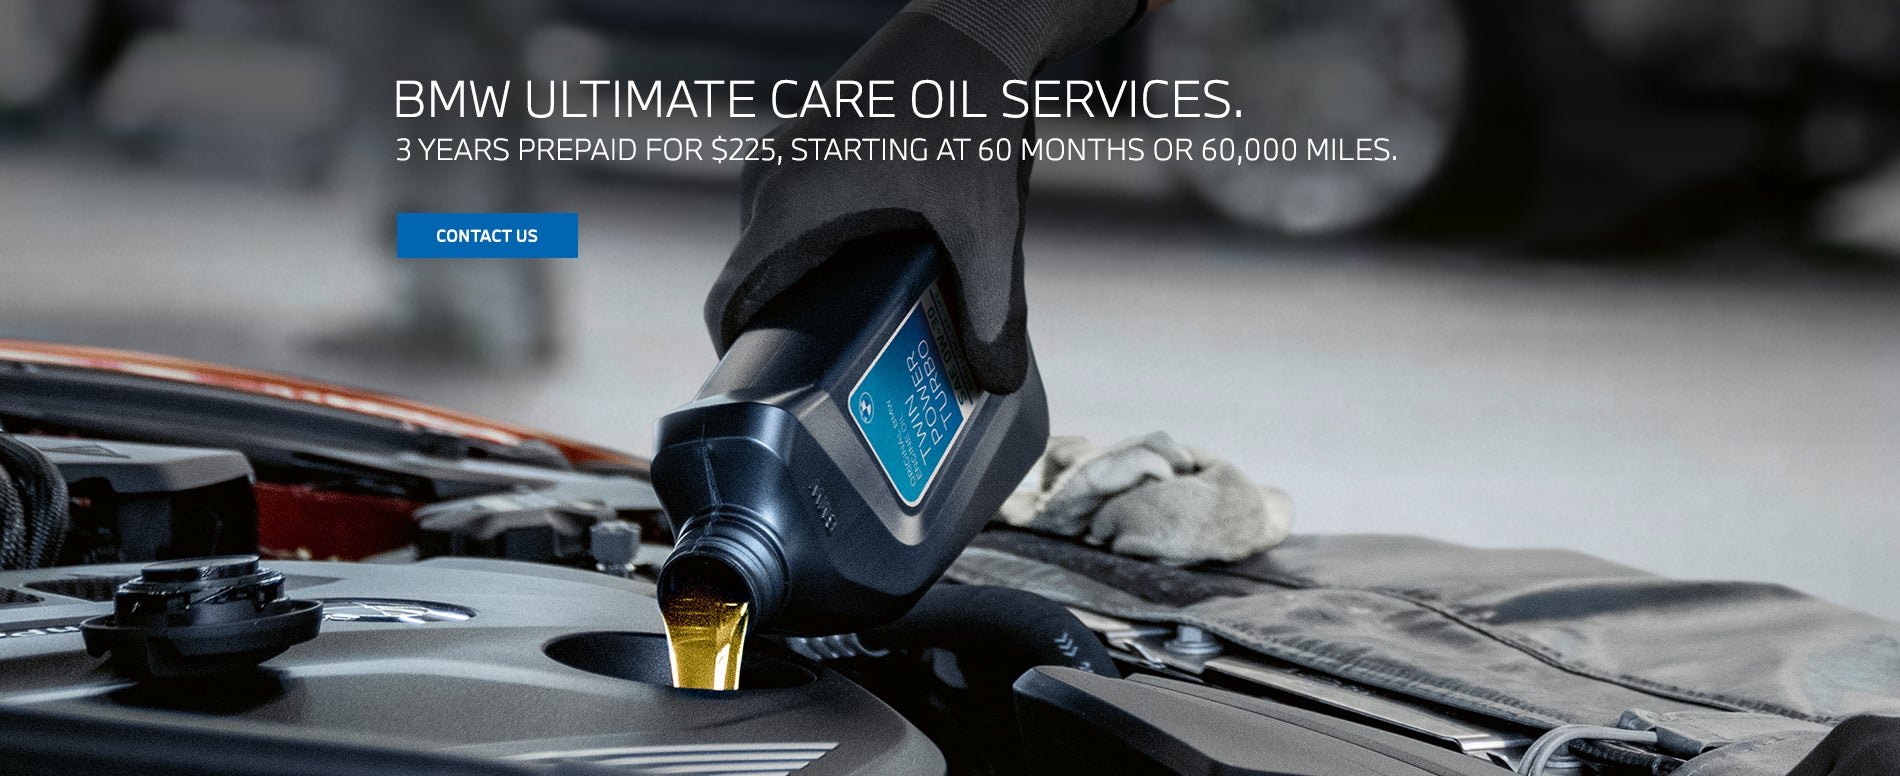 BMW Ultimate Care Oil Services.